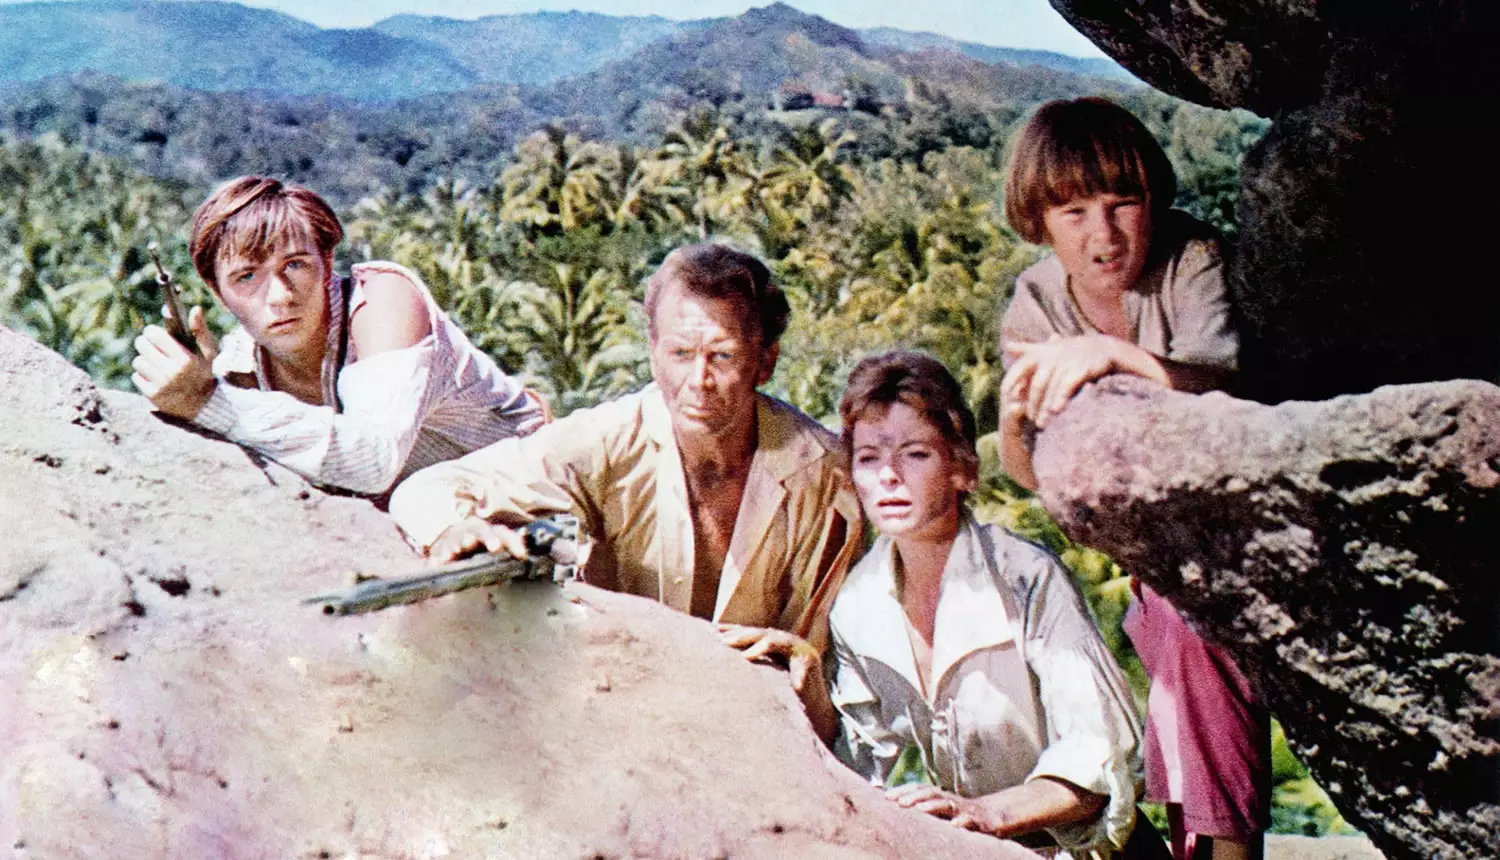 The live-action film Swiss Family Robinson also carries a warning (